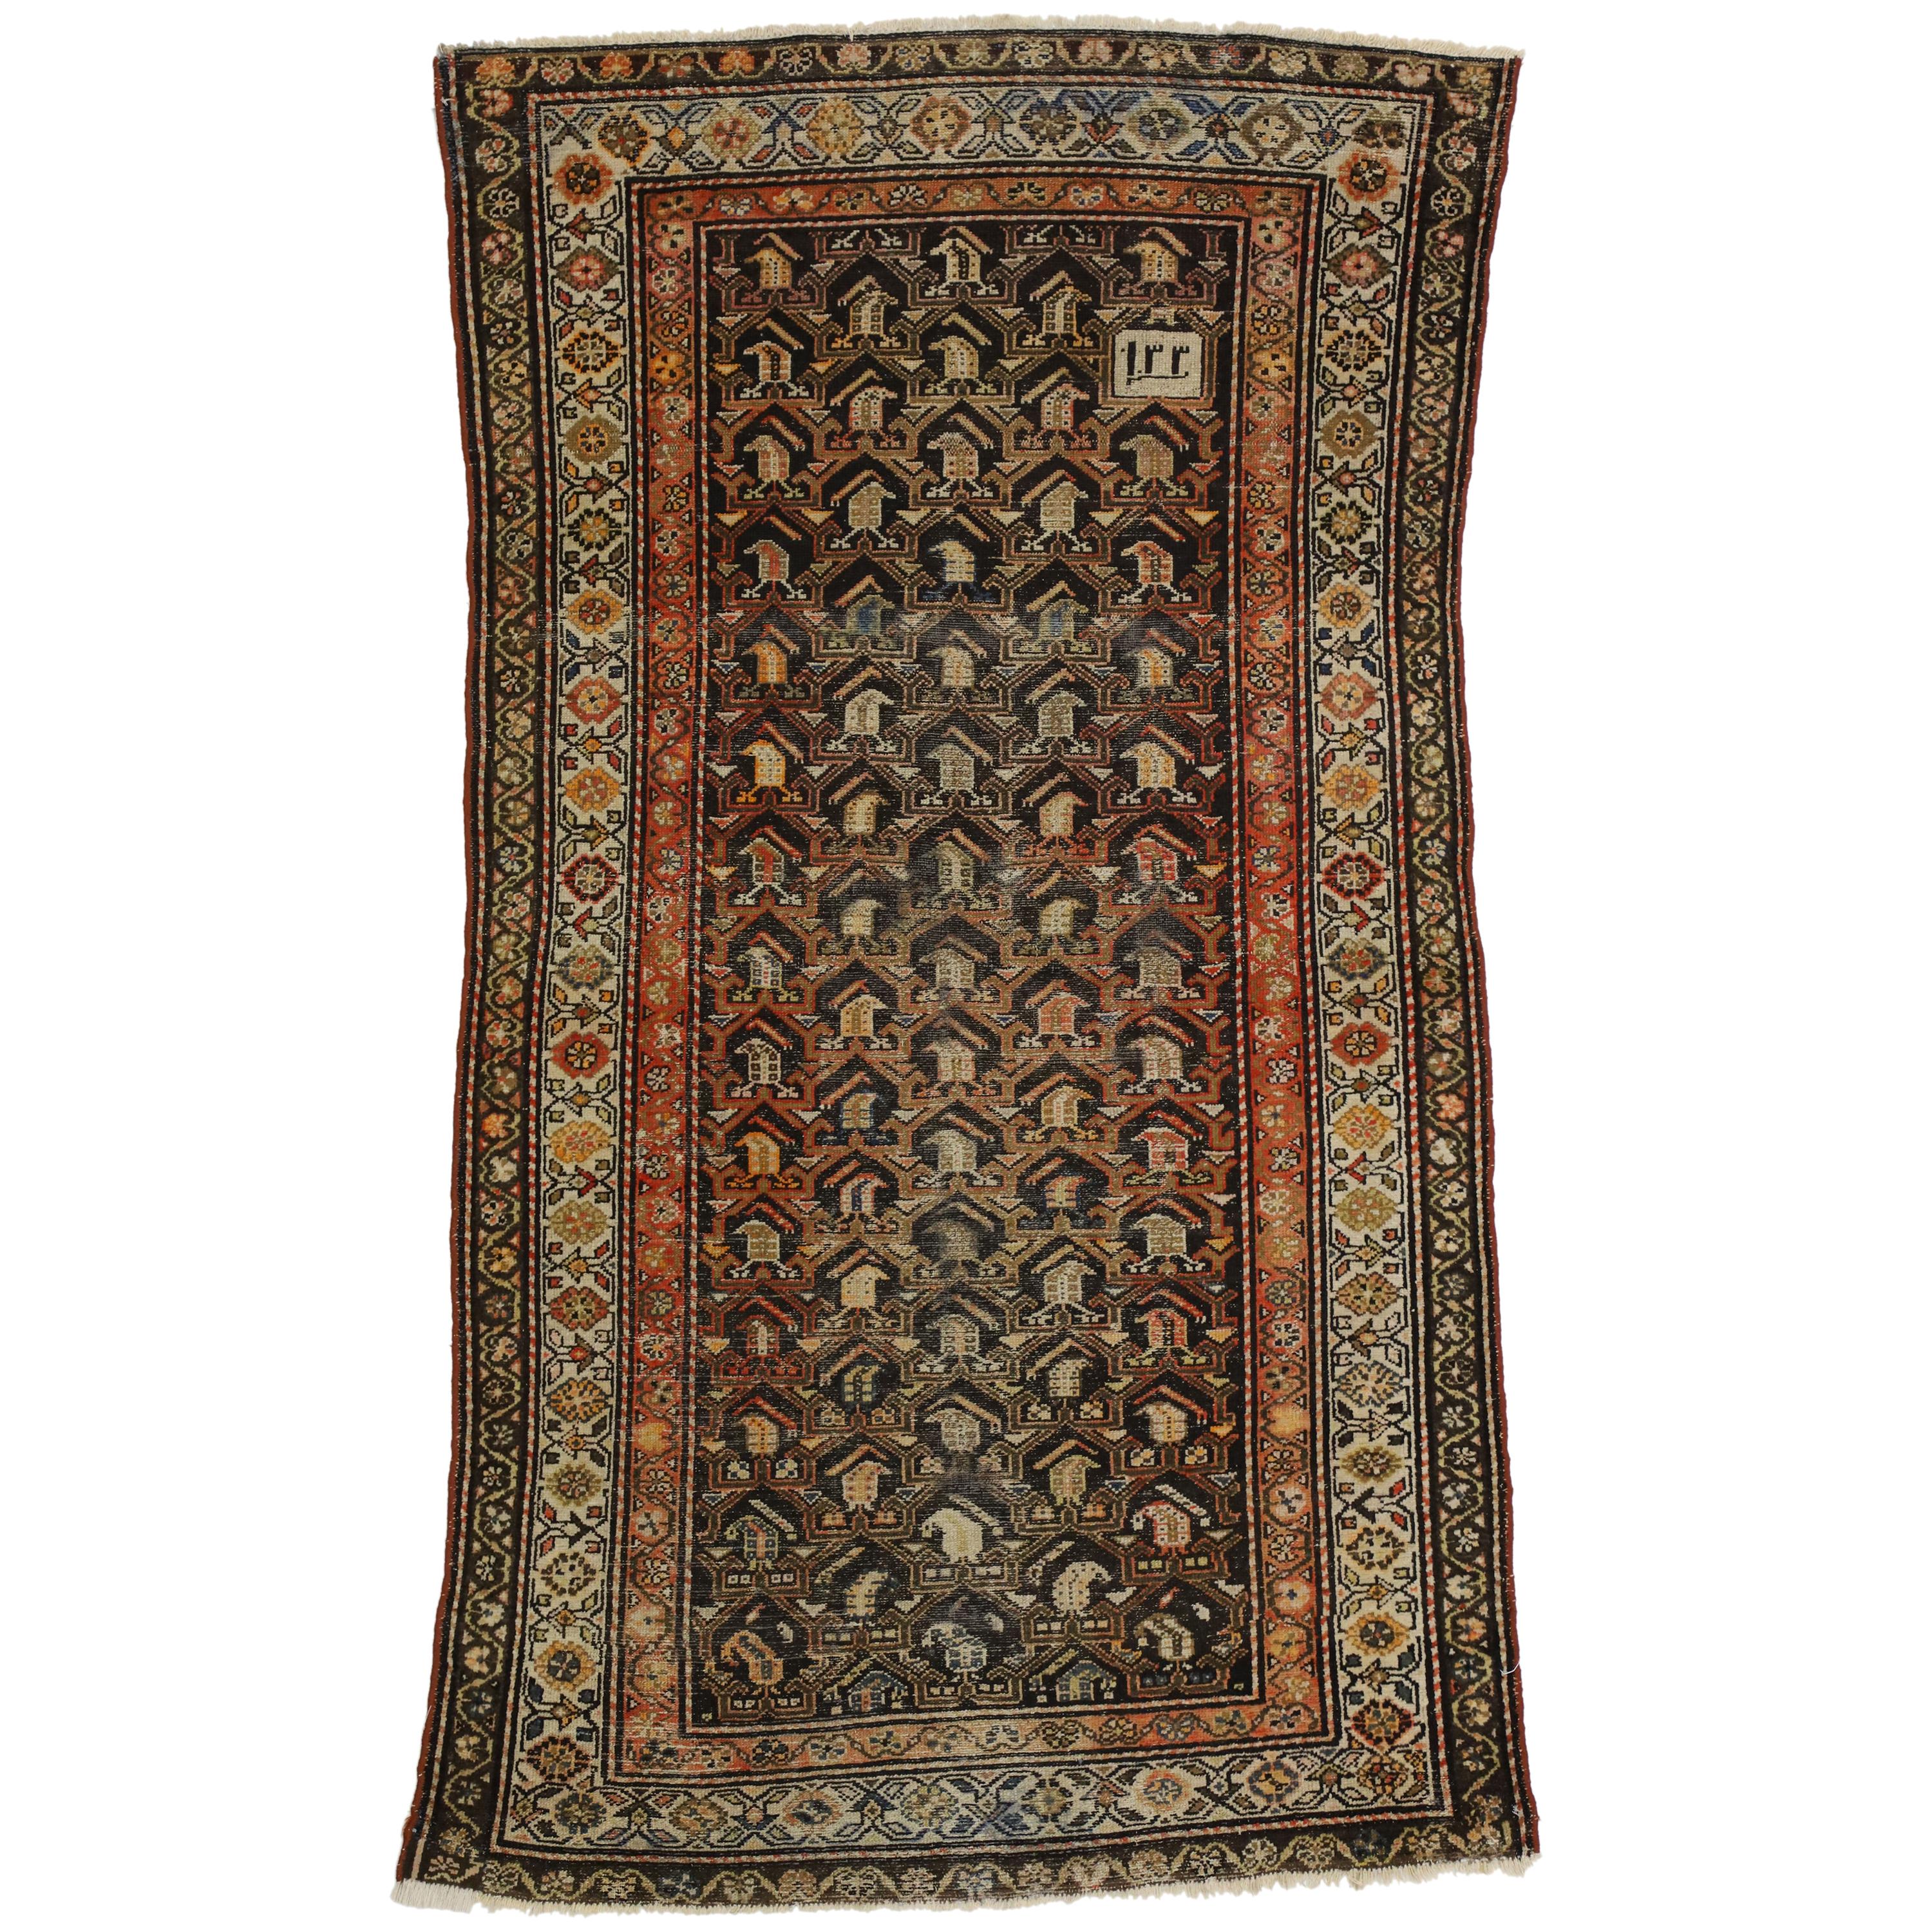 Worn-In Distressed Antique Persian Malayer Rug with Adirondack Lodge Style